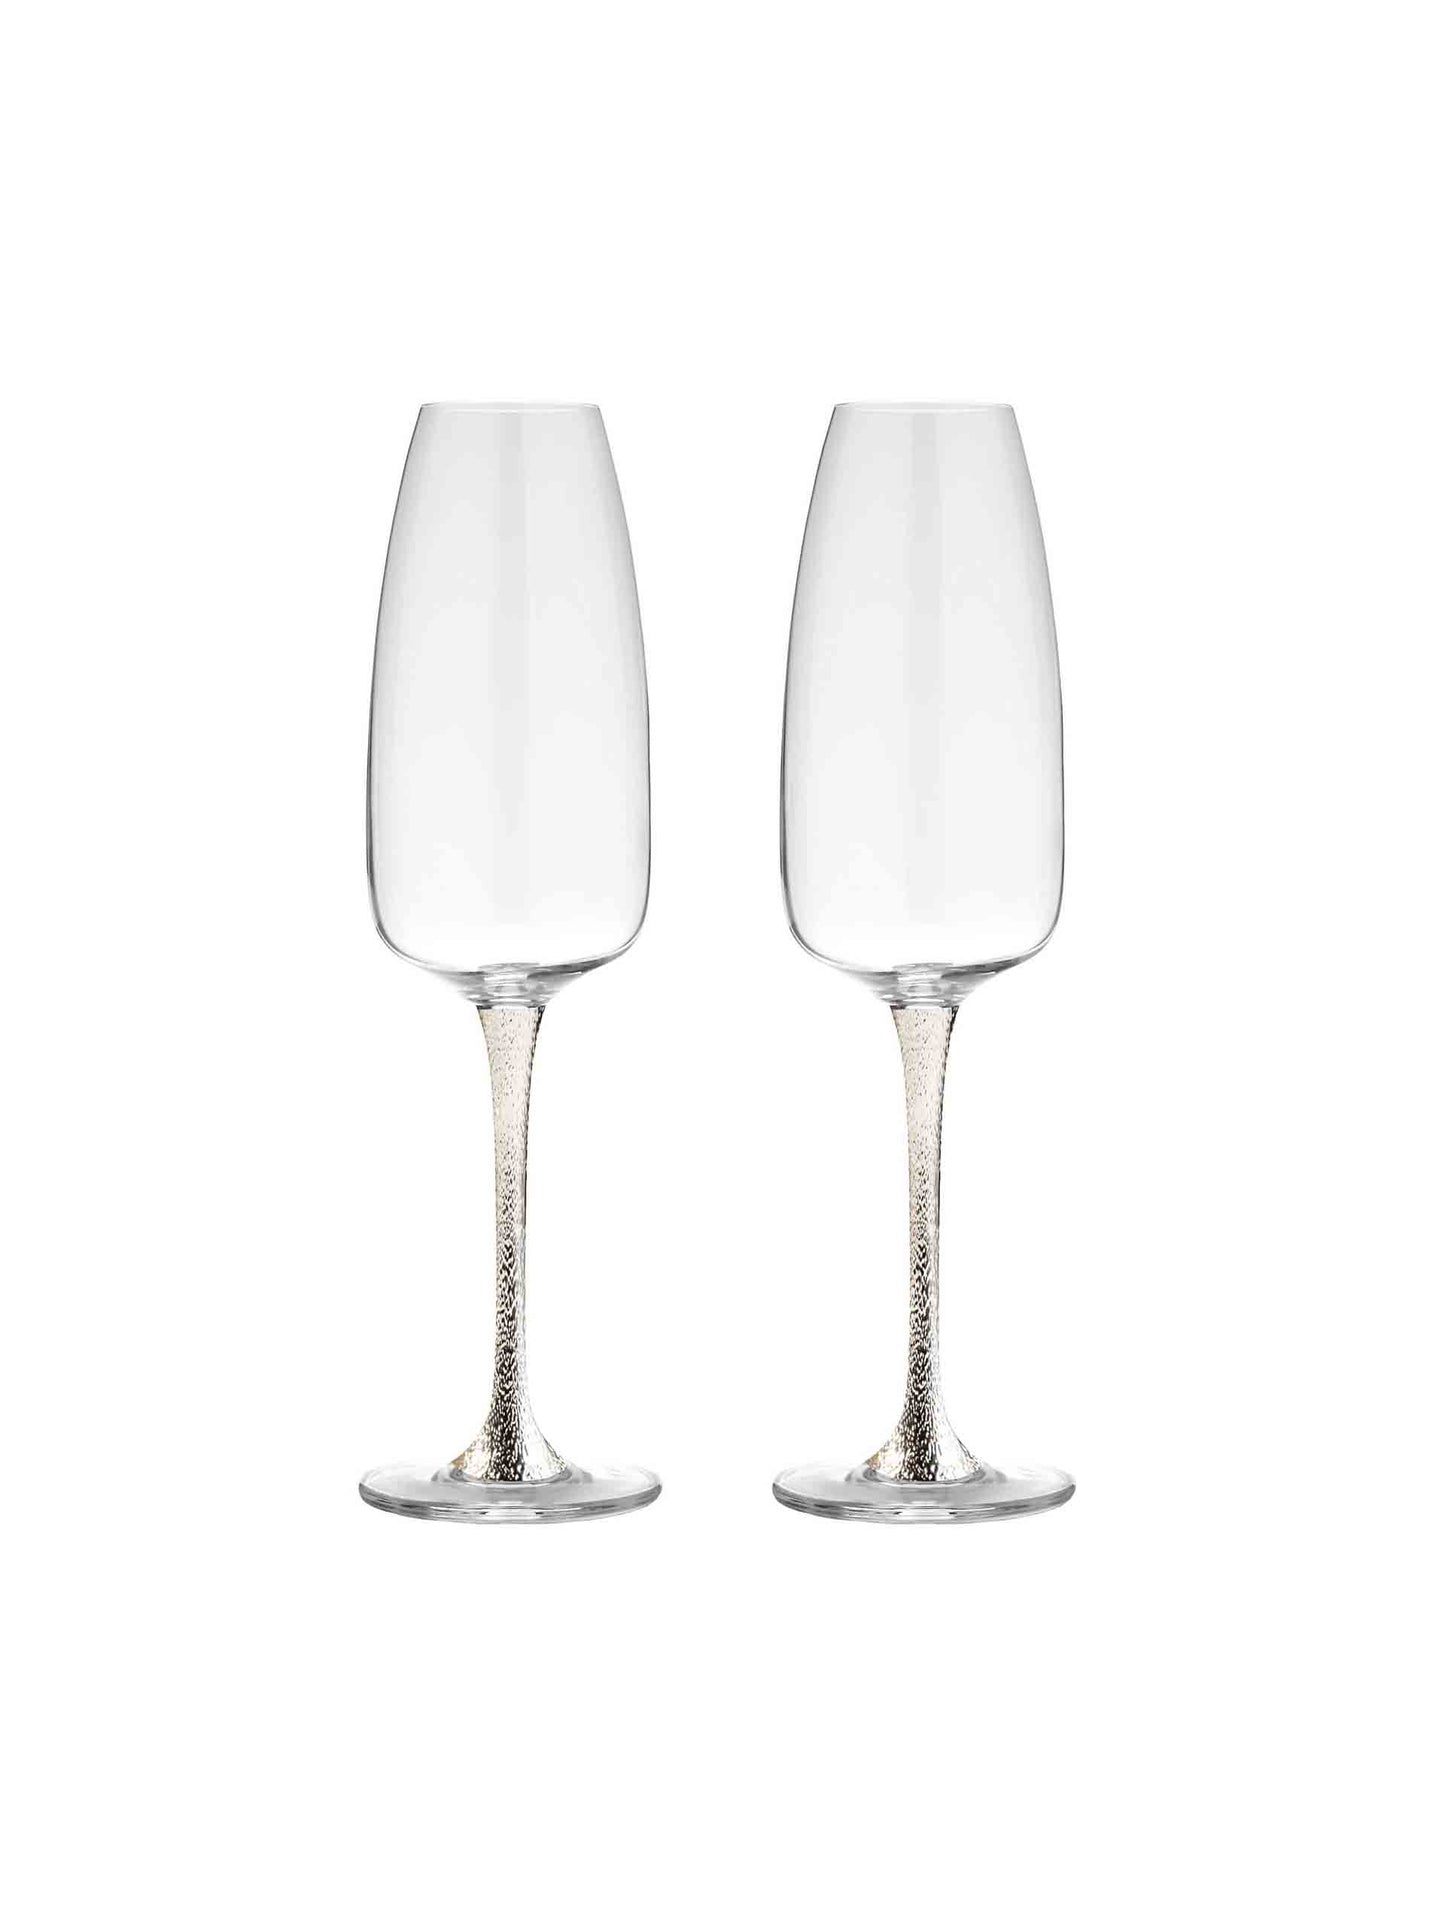 Argenesi 'Canada' silver stem glasses - Set of two.